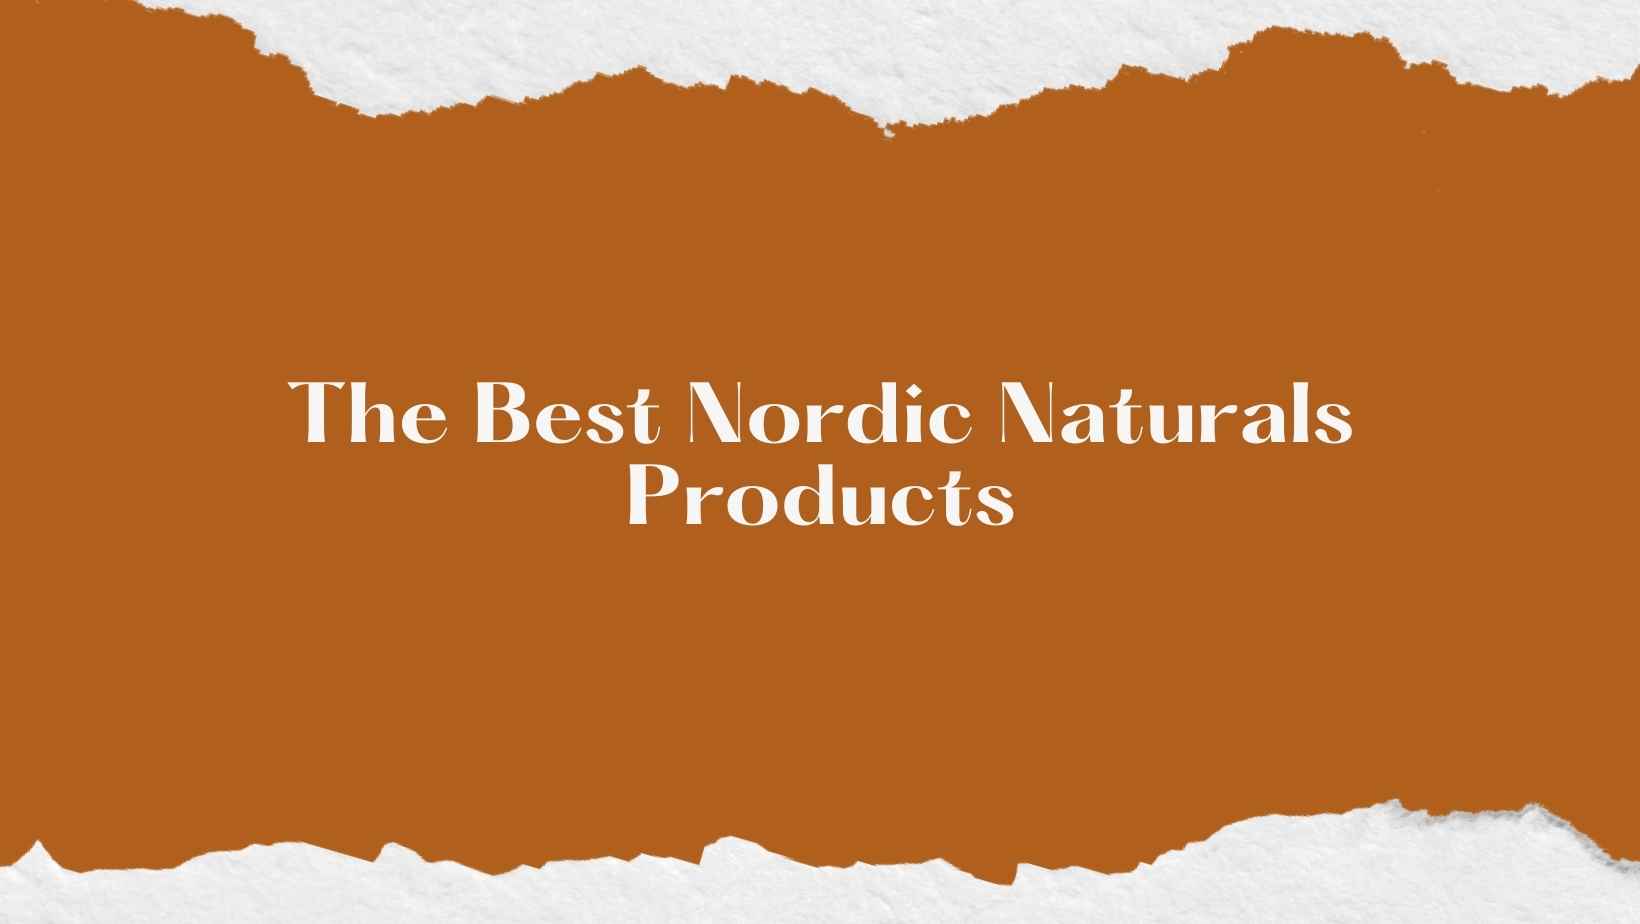 Nordic Naturals Products: Our 5 Favorites